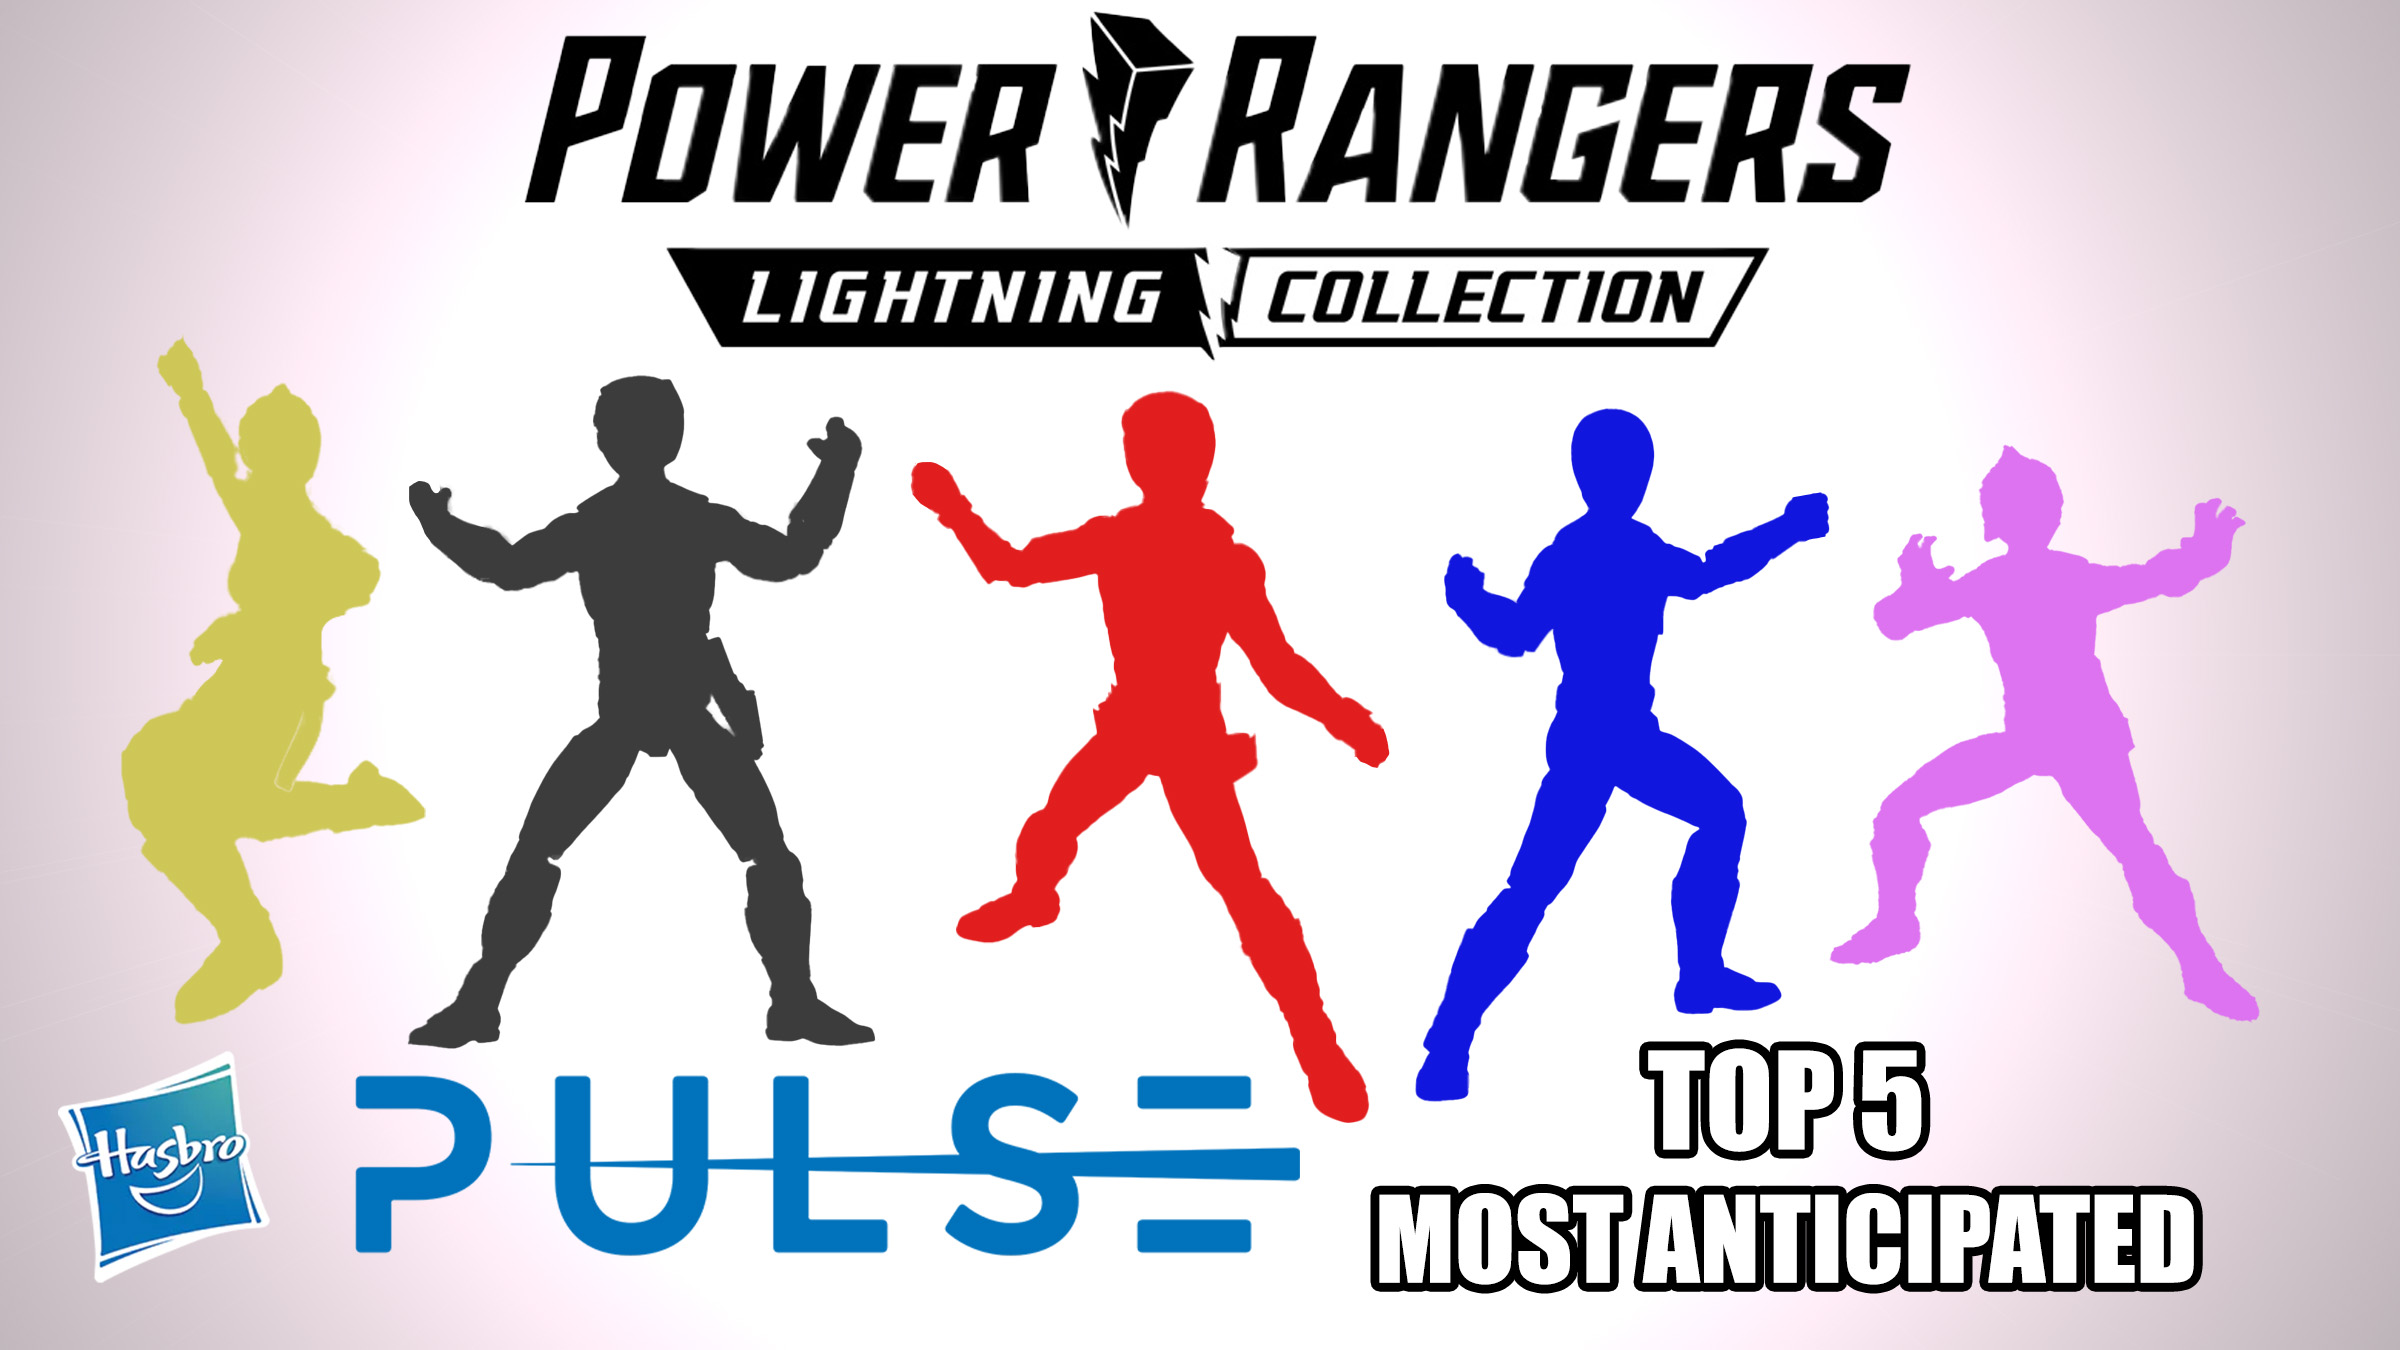 Top 5 Most Anticipated Power Rangers in The Outstanding Lightning Collection